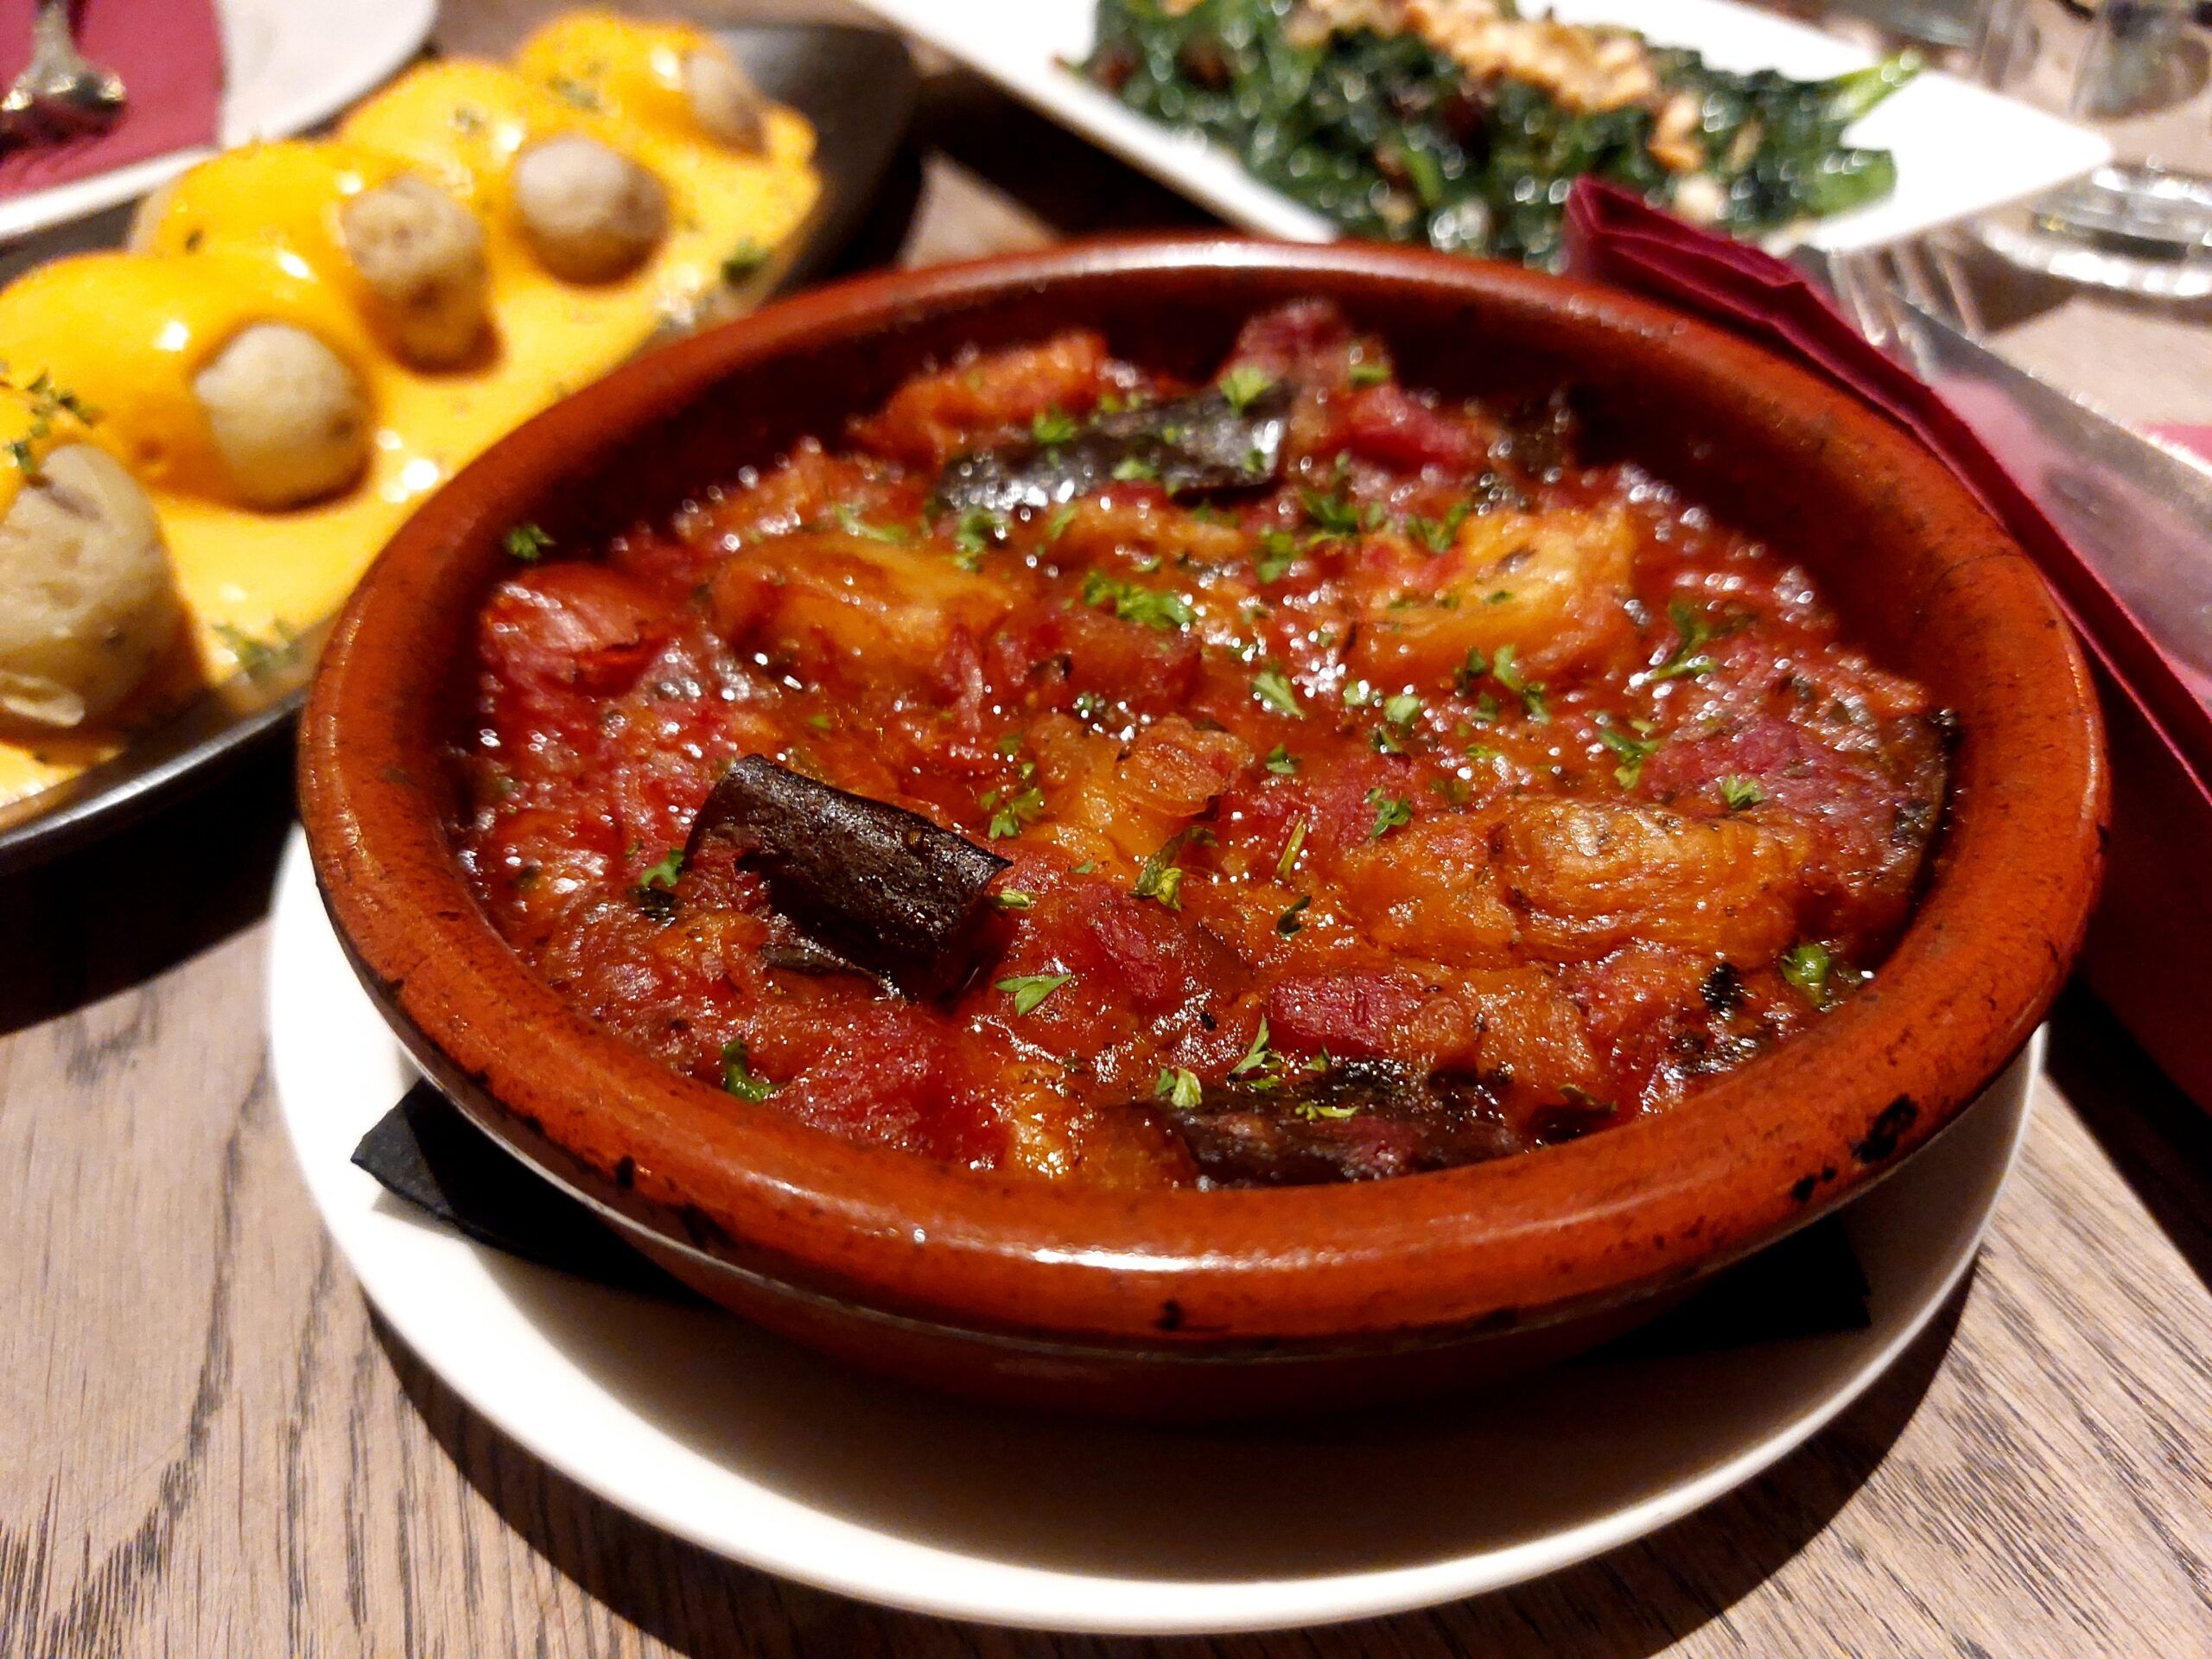 A terracotta bowl of tapas with plates of tapas in the background. Vegan tapas experience blog